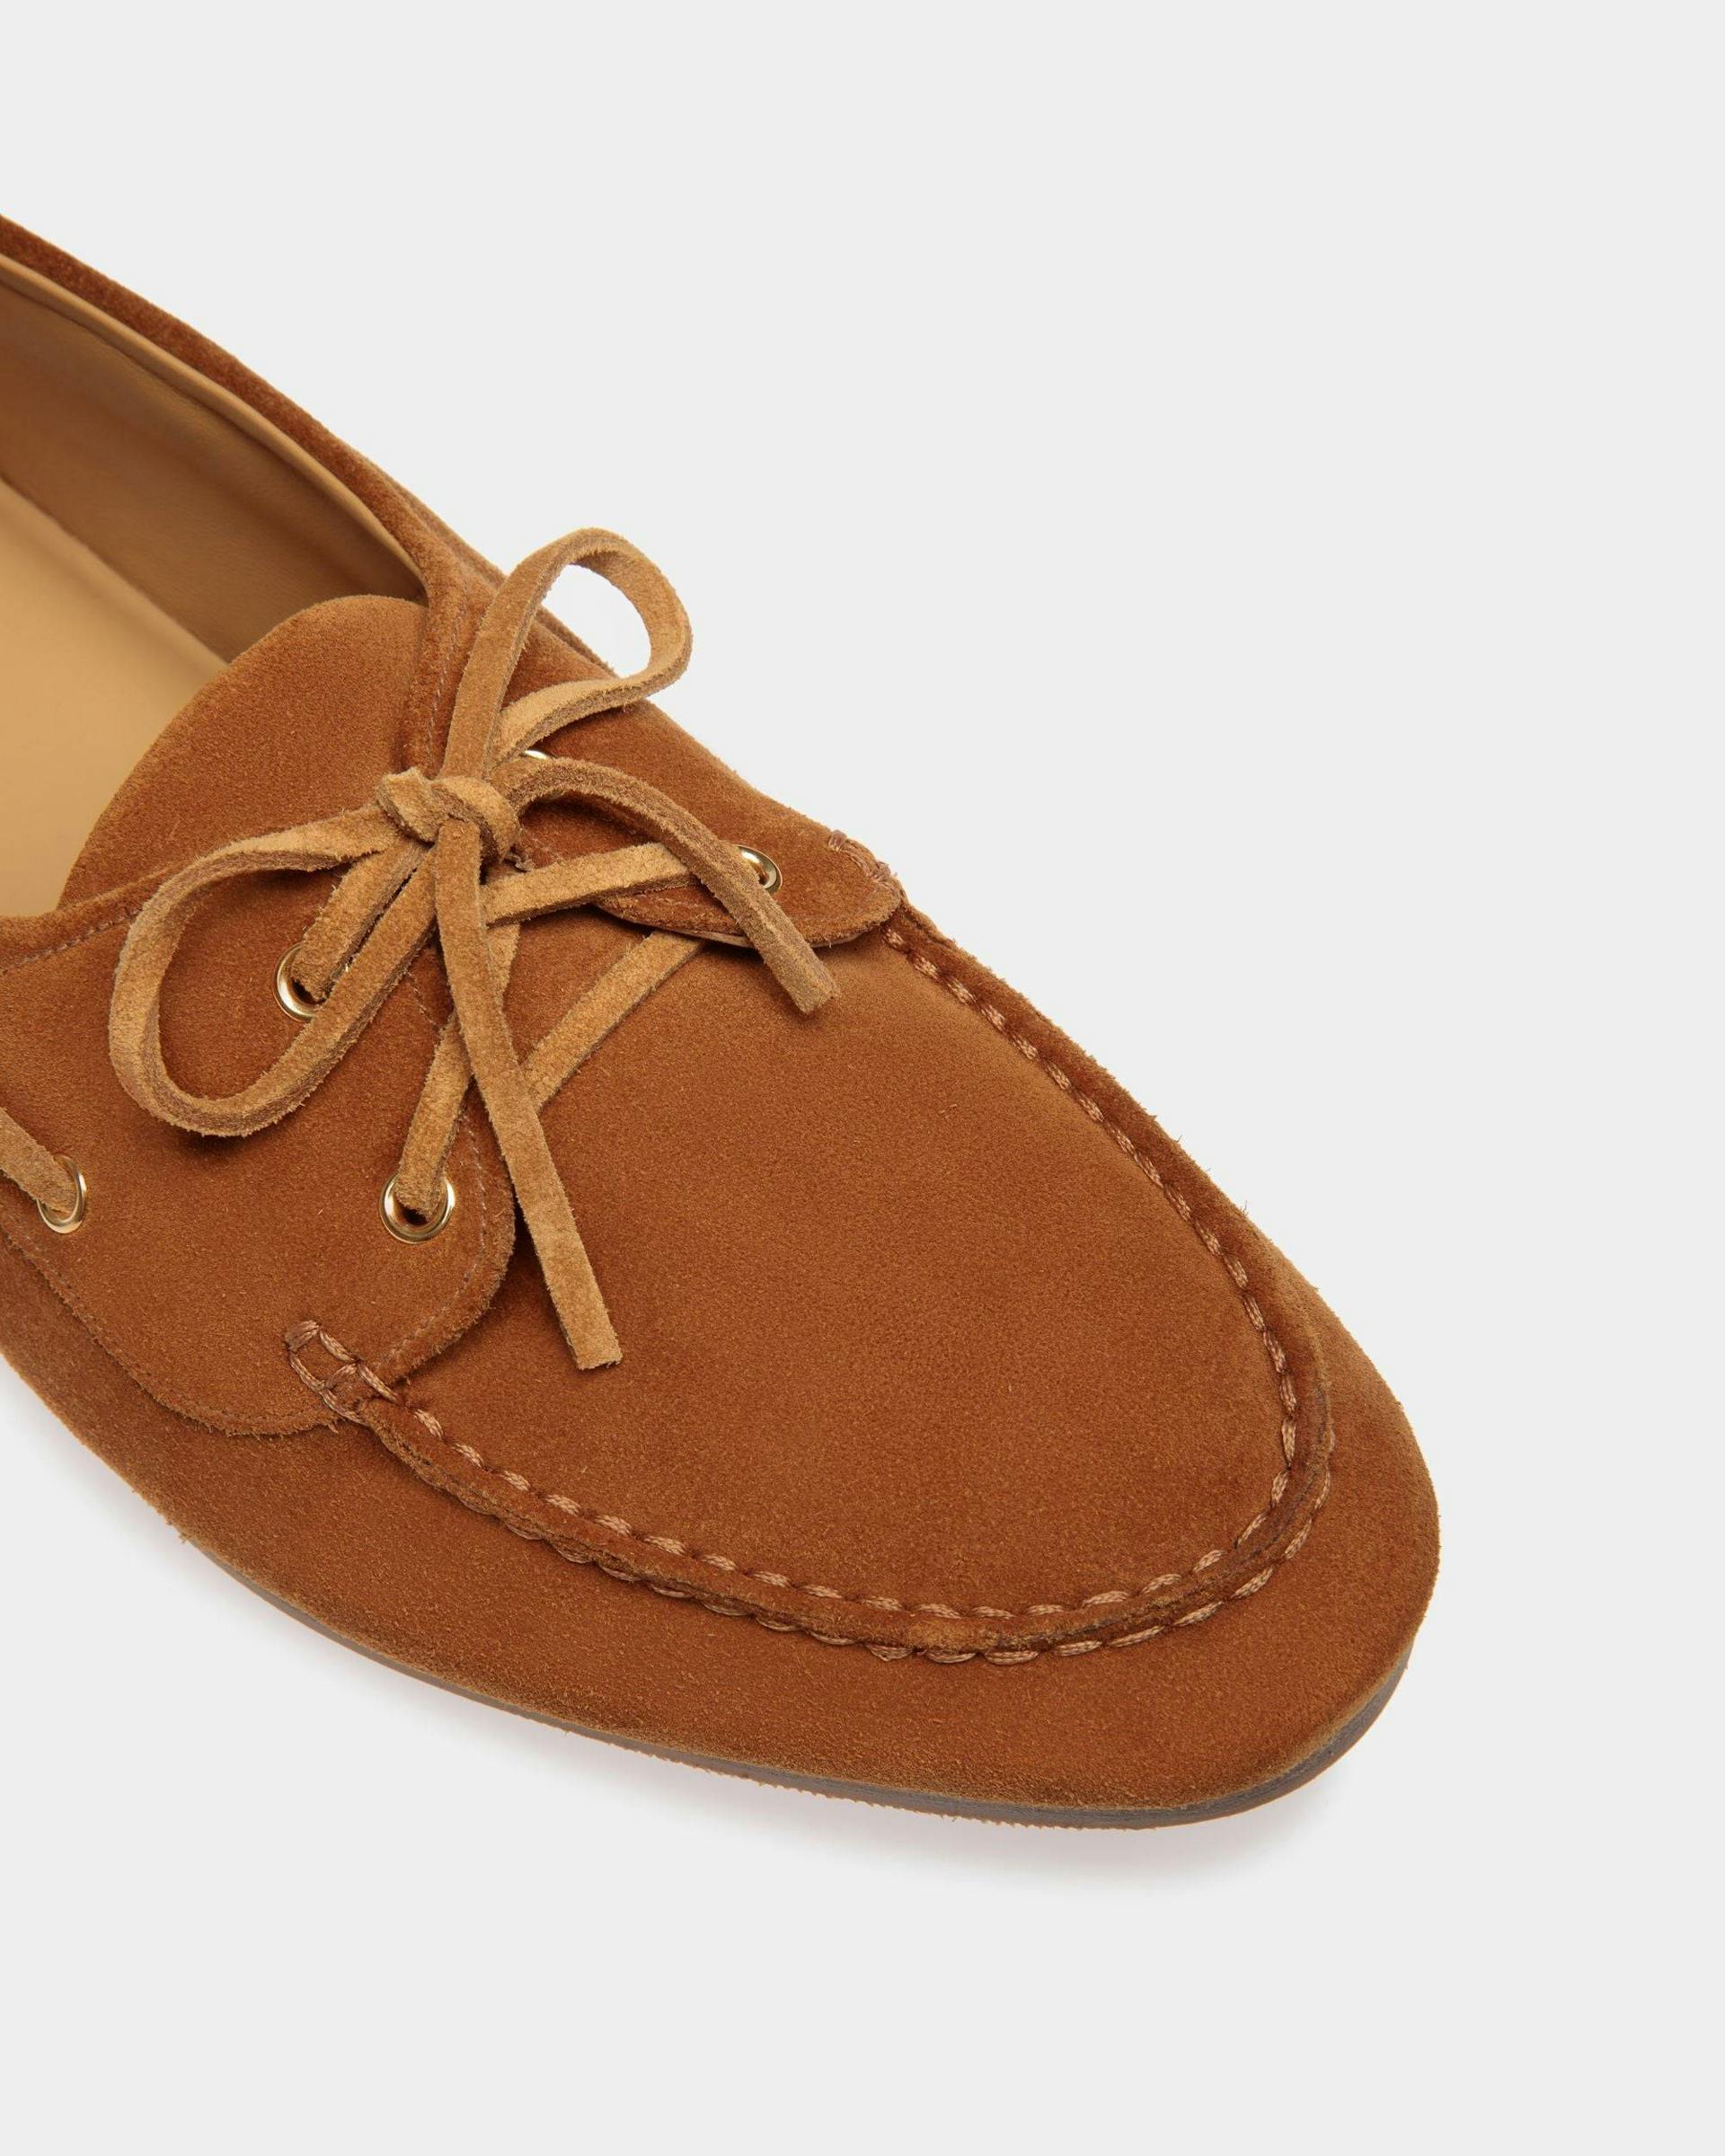 Men's Plume Moccasin in Brown Suede | Bally | Still Life Detail